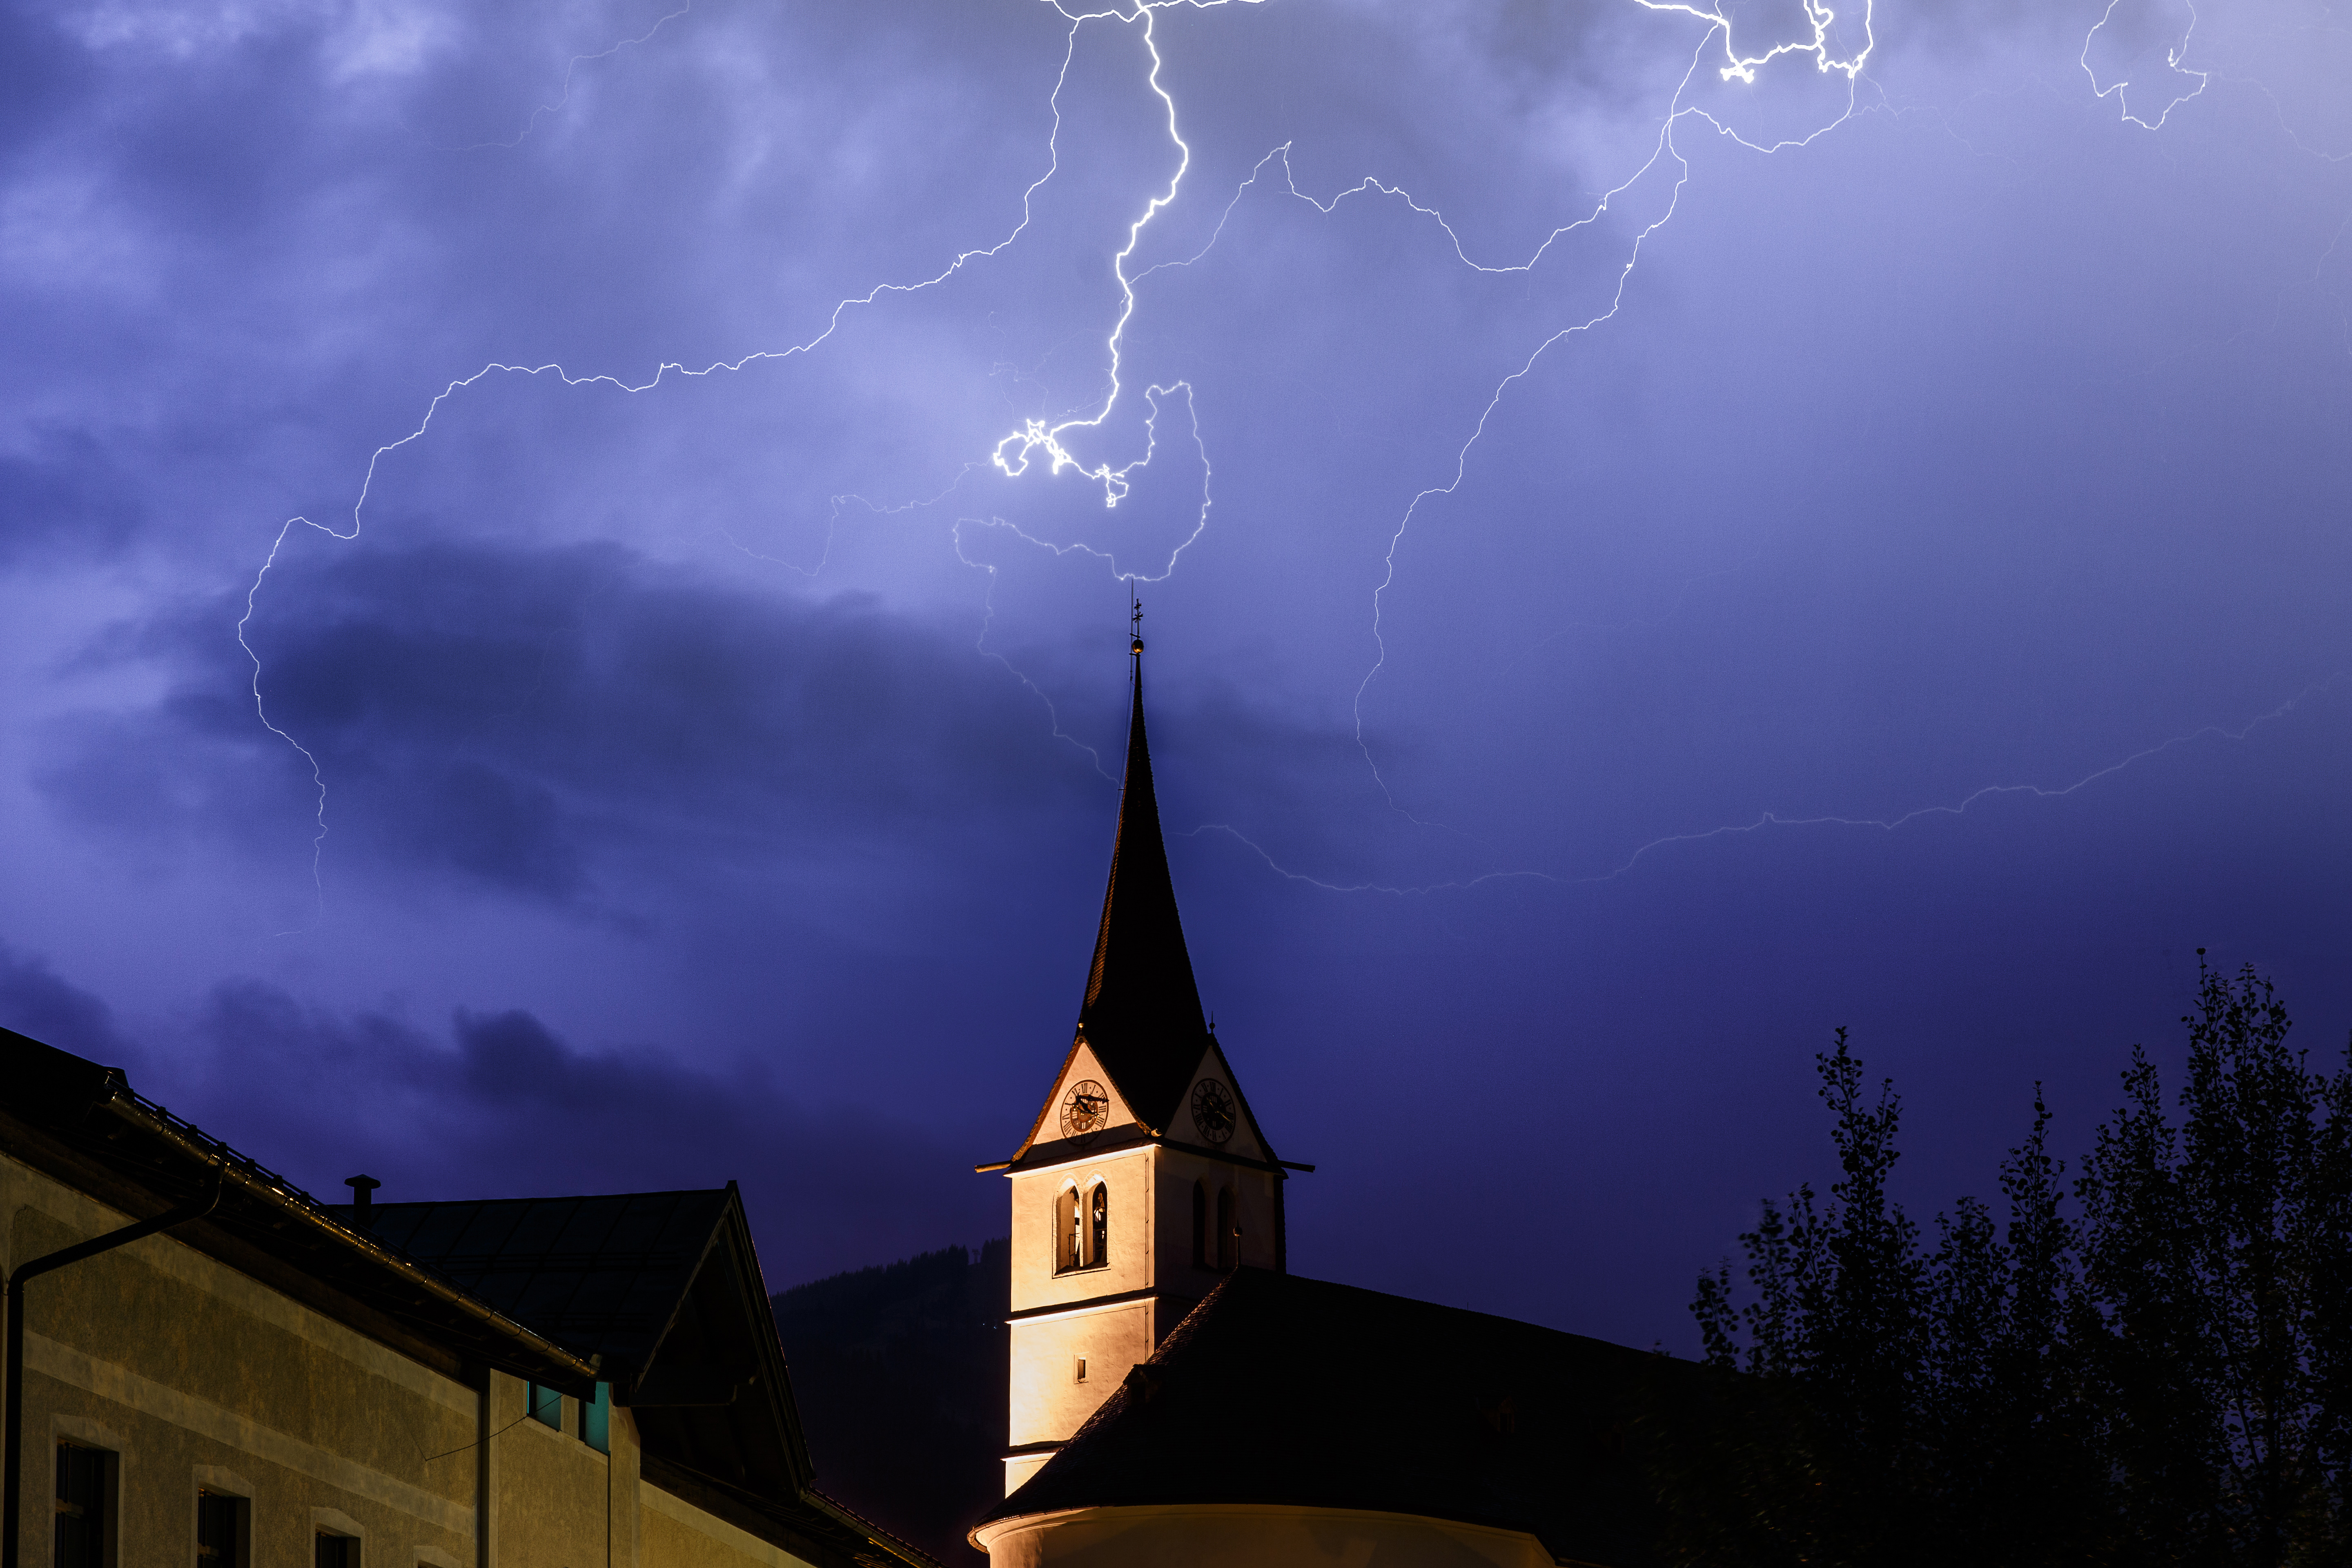 A lightning storm with a church in the foreground | Source: Shutterstock